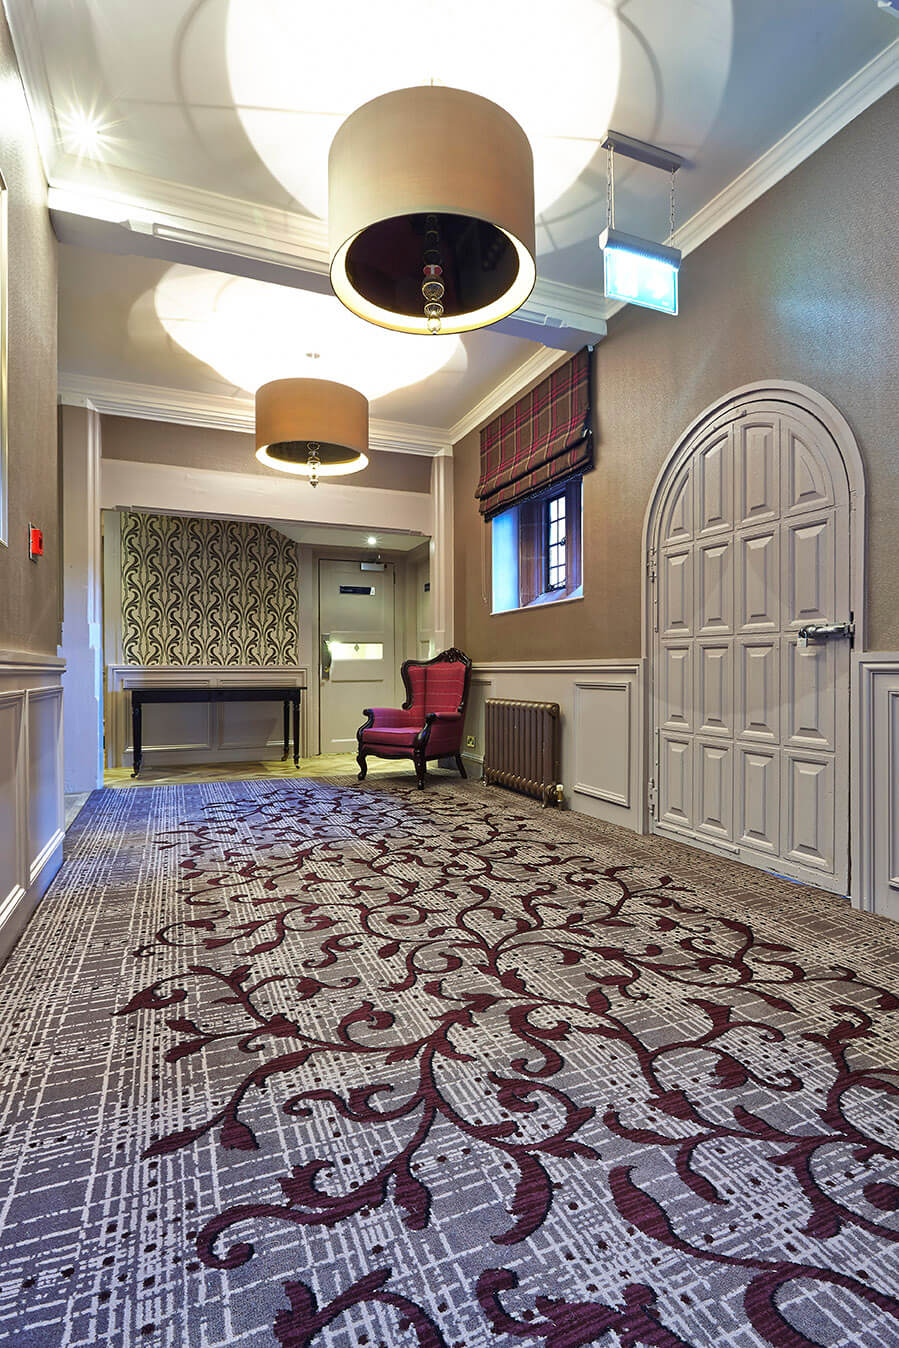 Abbey House Hotel bespoke hallway carpet, with grey and cream strips, as well as a red floral patterns, designed by Wilton Carpets